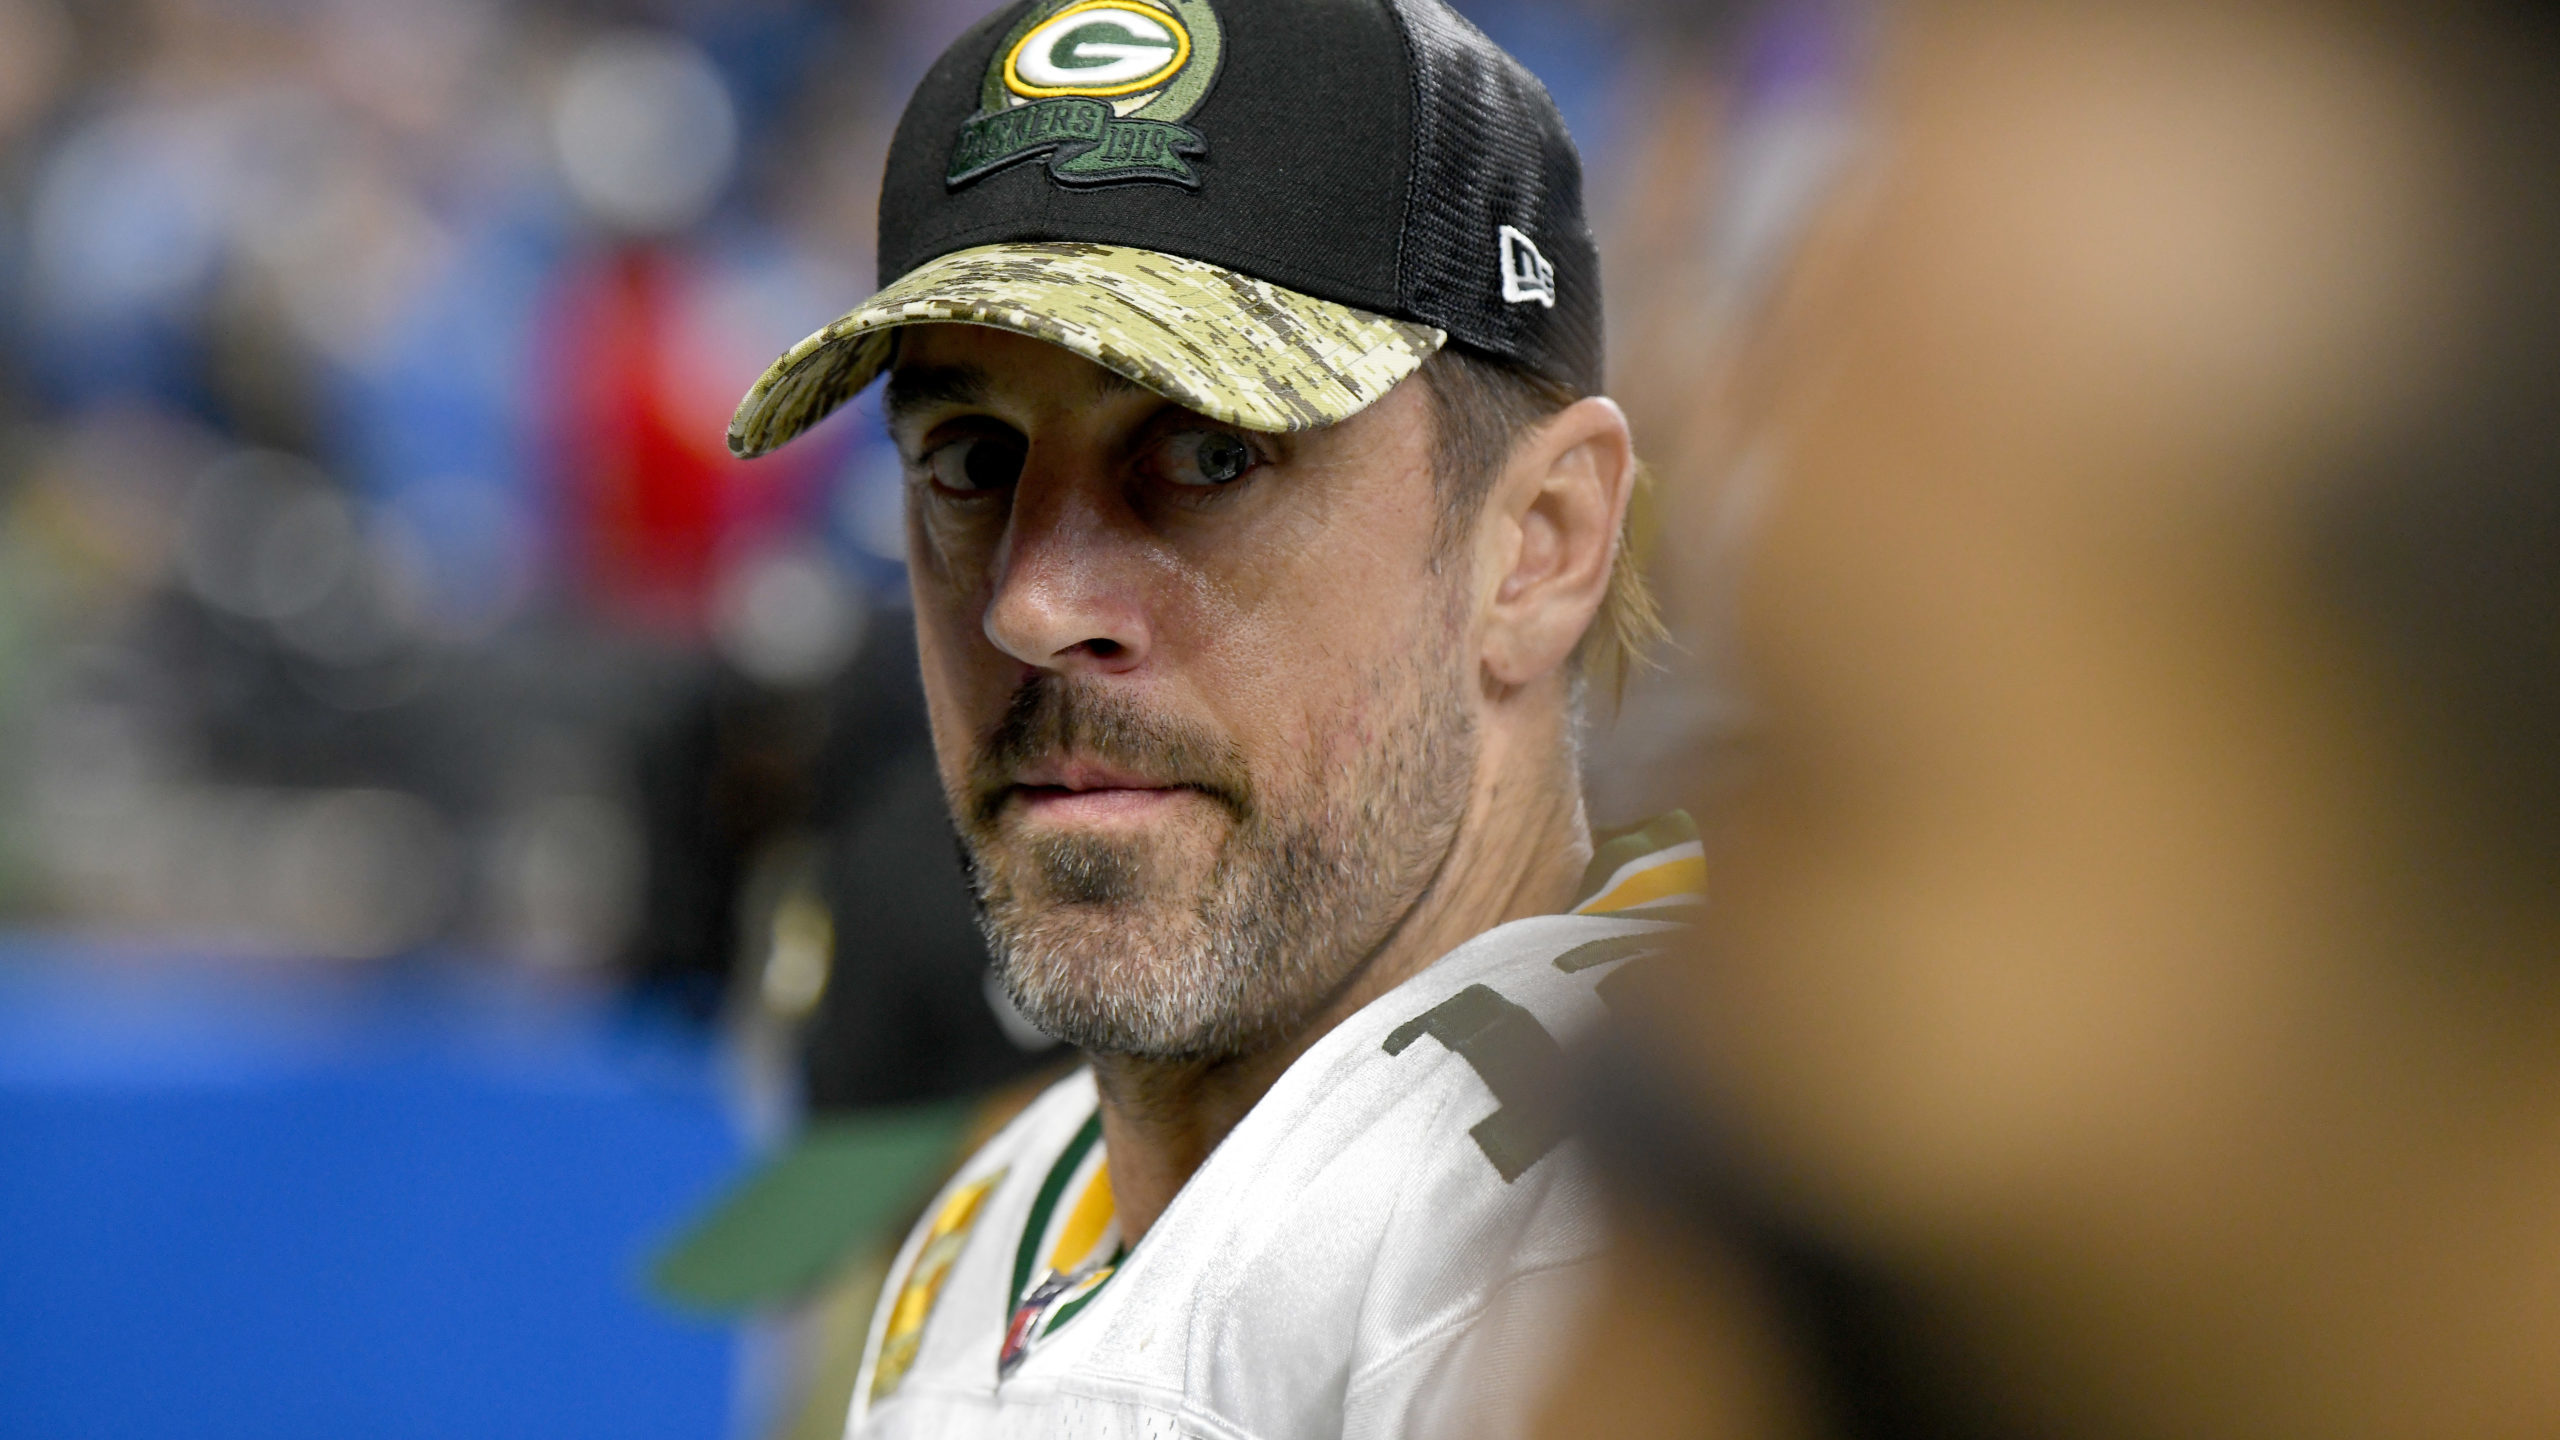 Green Bay Packers QB Aaron Rodgers